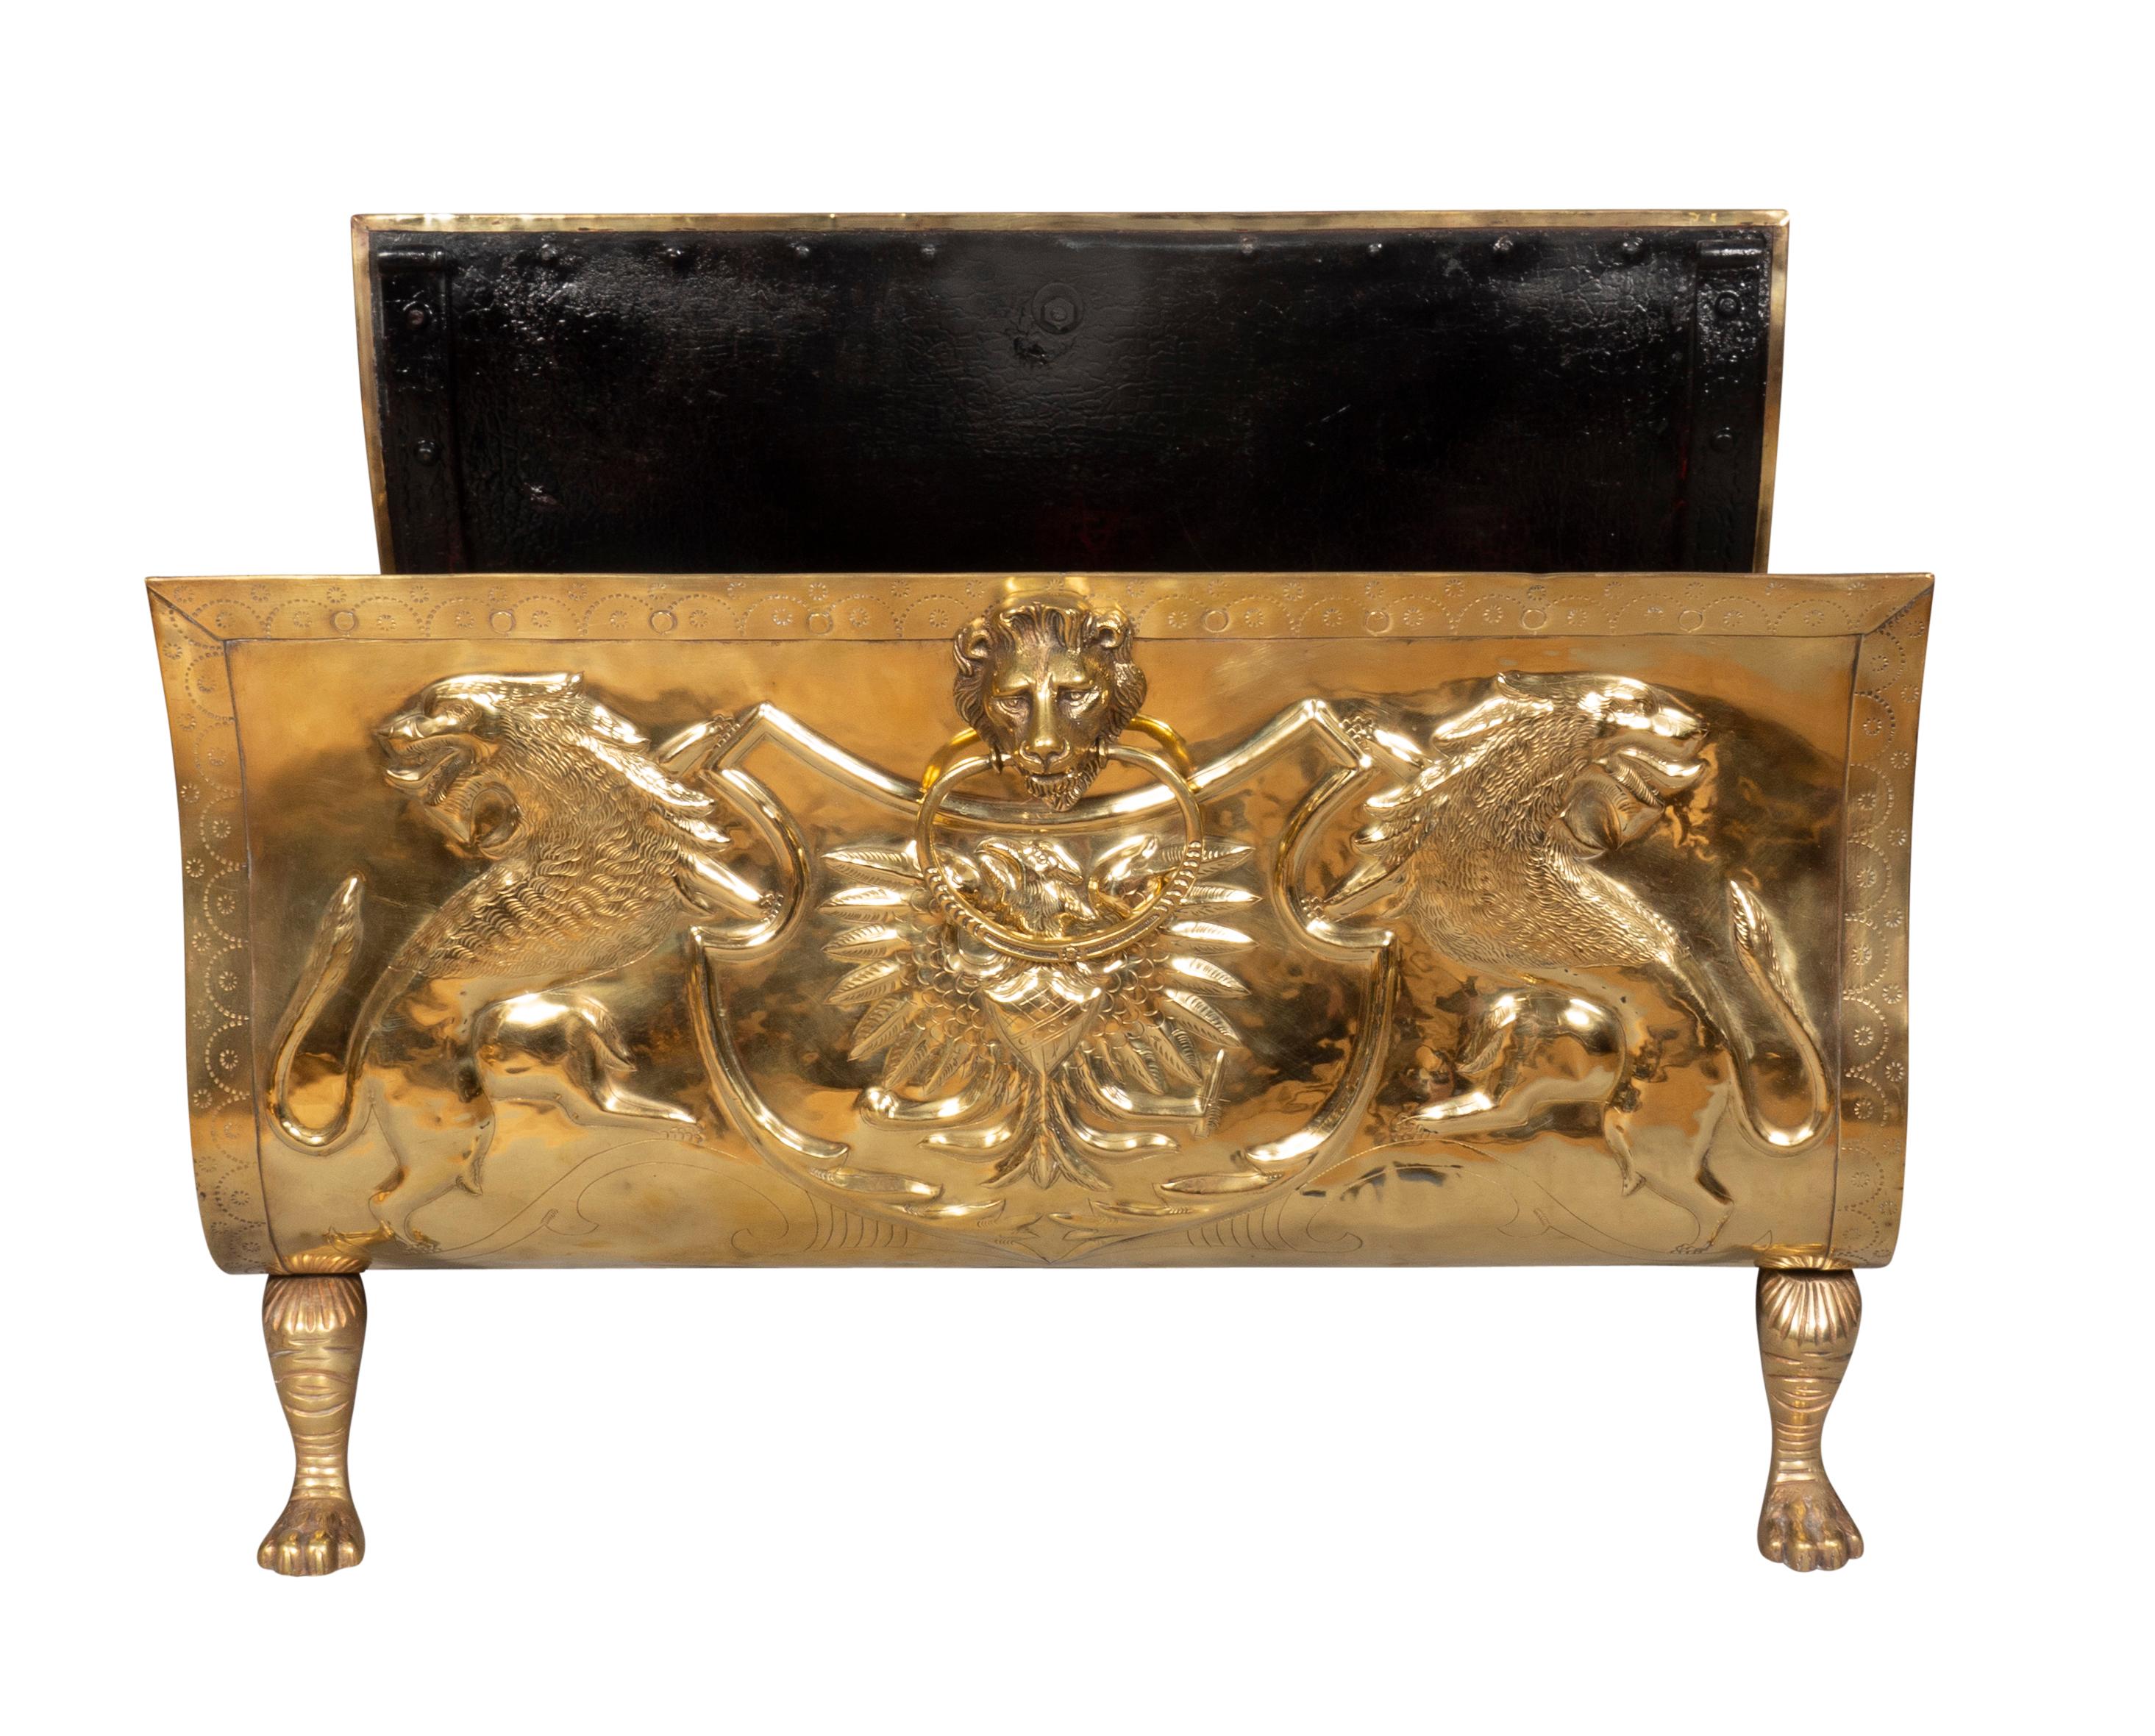 Heavy gauge with lion and loins head decoration with an eagle, Black painted interior, brass feet. Polished.